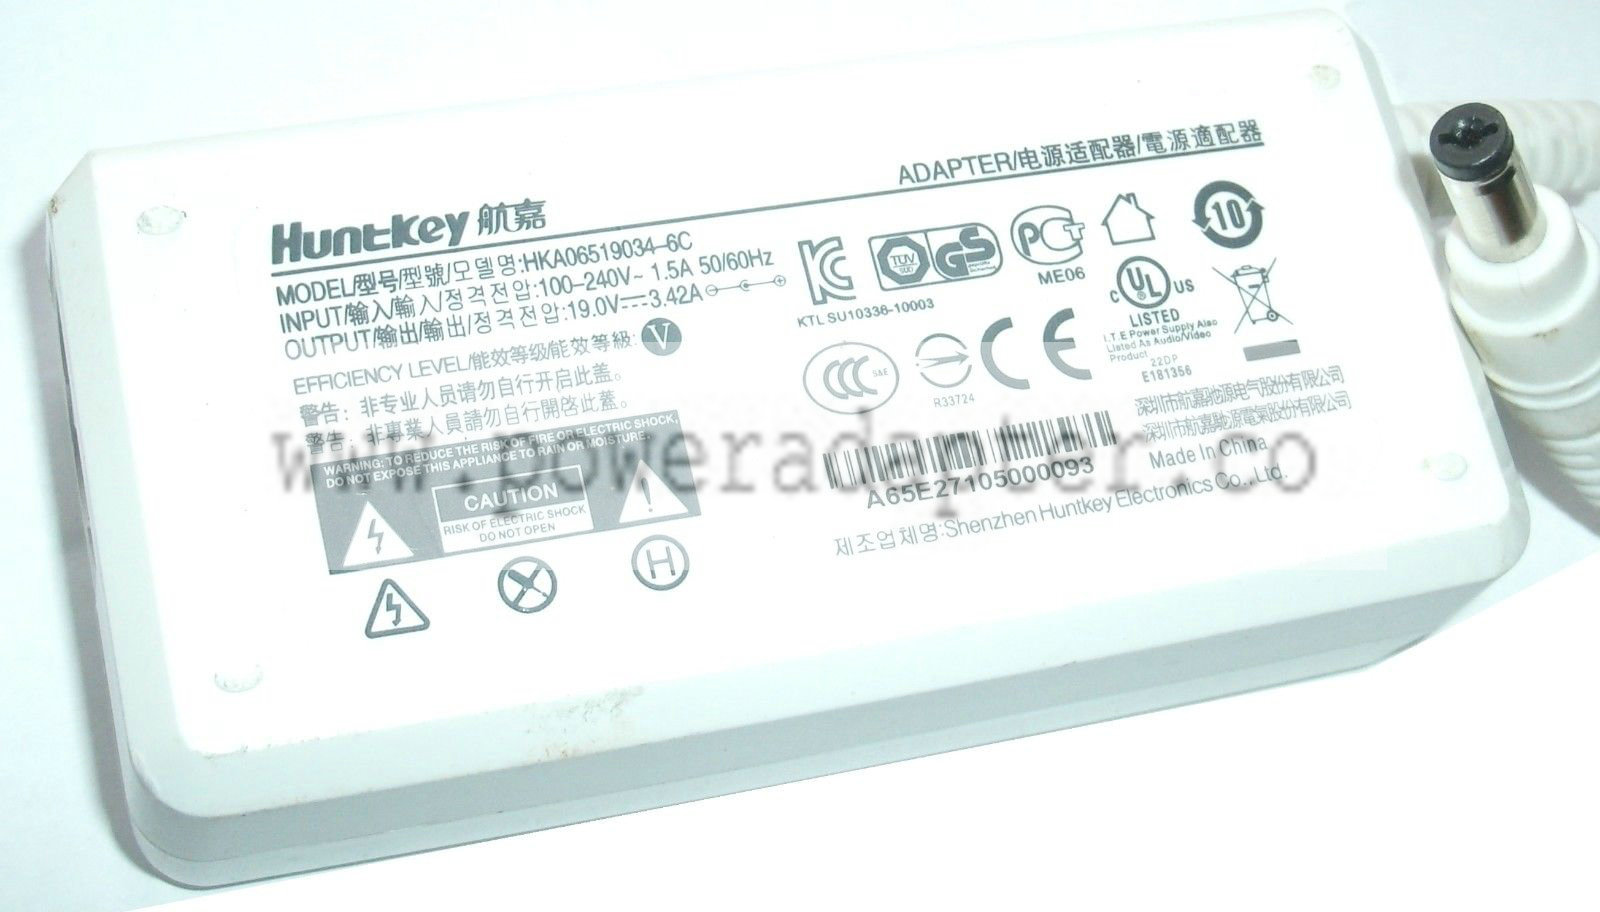 HUNTKEY POWER ADAPTER HKA06519034-6C 19.0V 3.42A HI THERE AND WELCOME TO THATS HOW INTERNATIONAL LTD WE ARE PROFESS - Click Image to Close